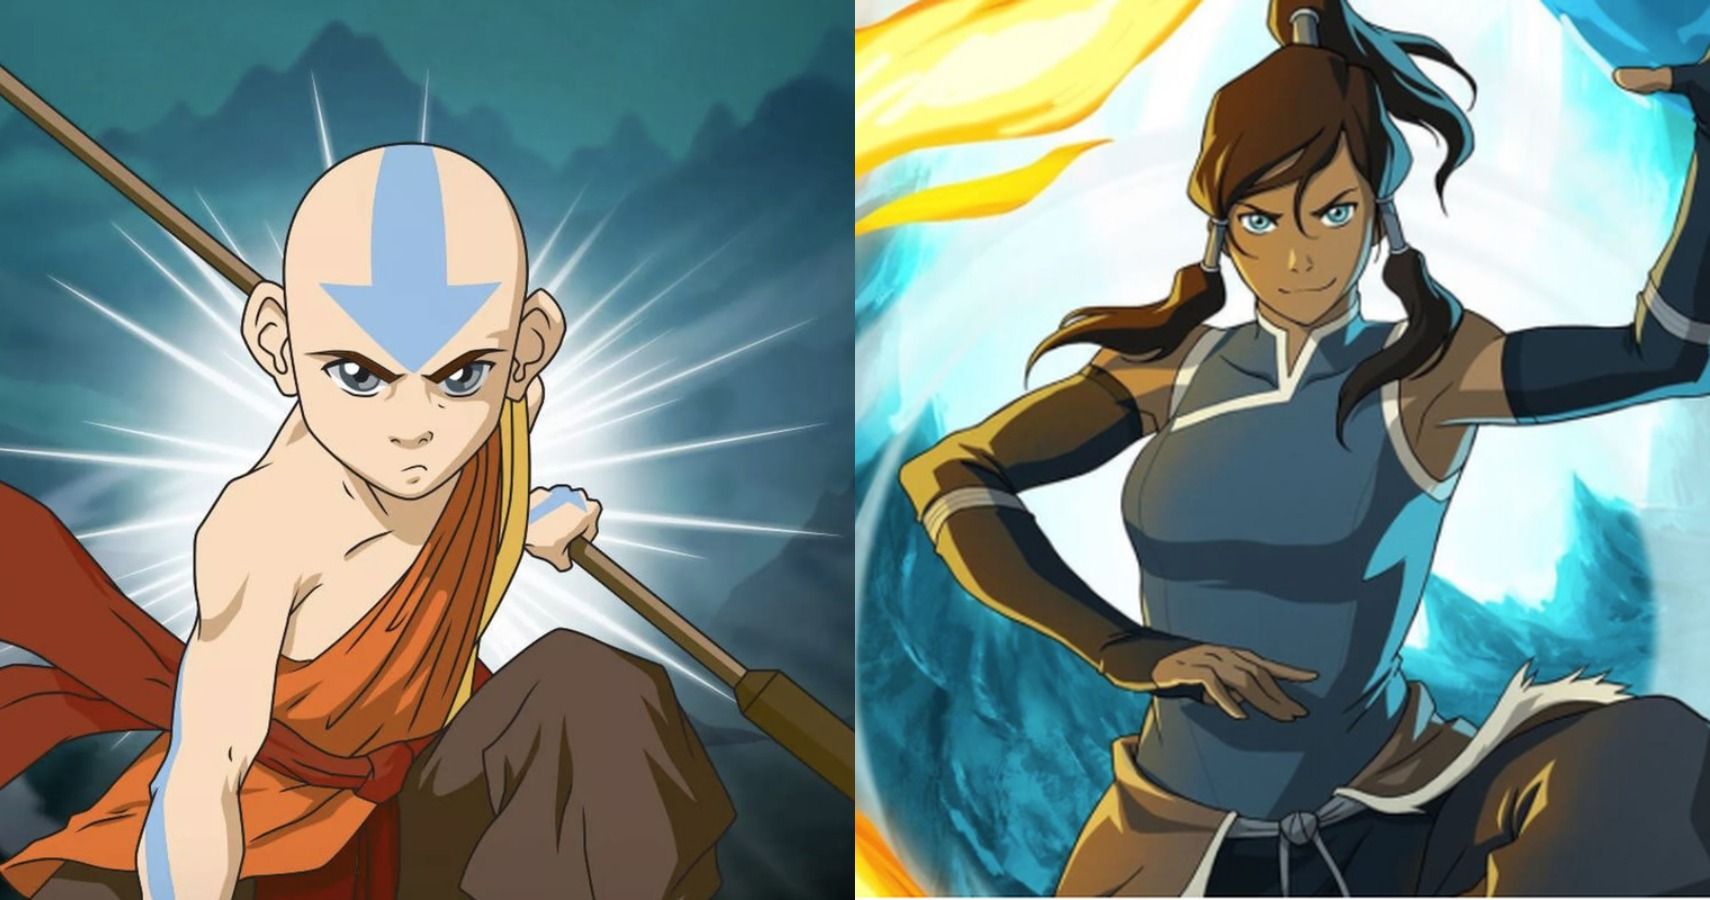 Avatar The Legend of Korra Is Better Than The Last Airbender